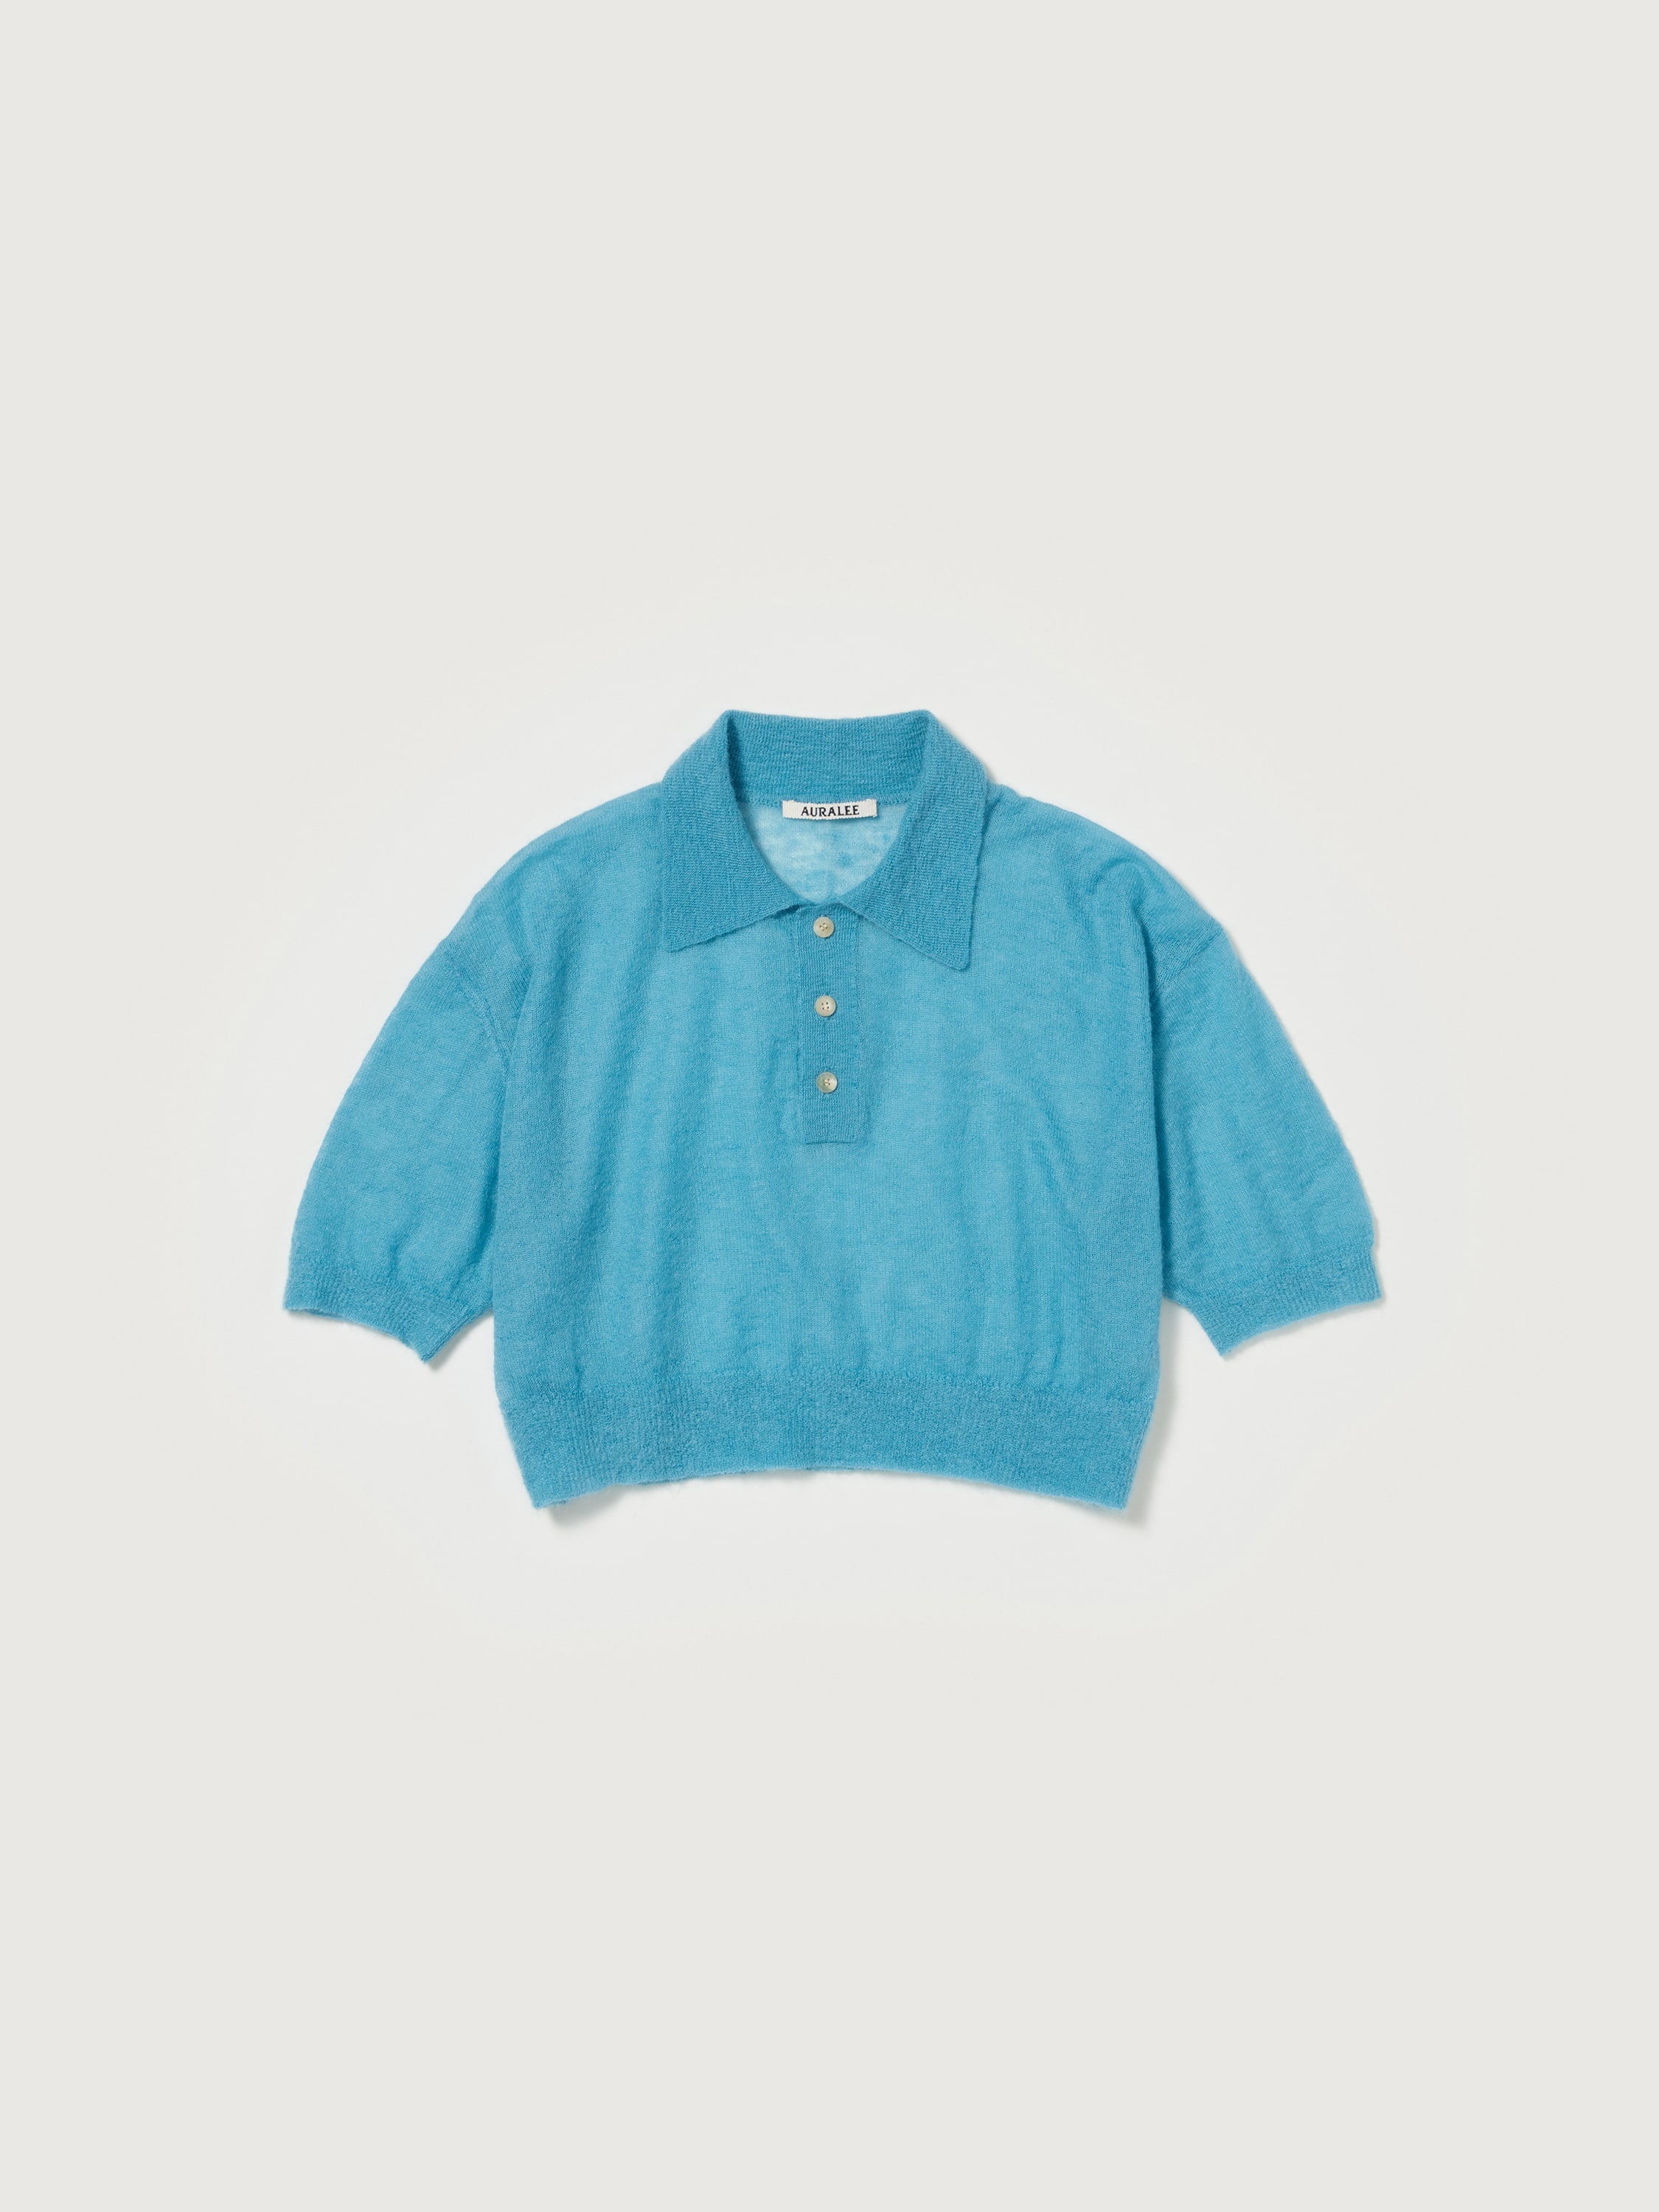 KID MOHAIR SHEER KNIT SHORT POLO 詳細画像 TURQUOISE BLUE 4